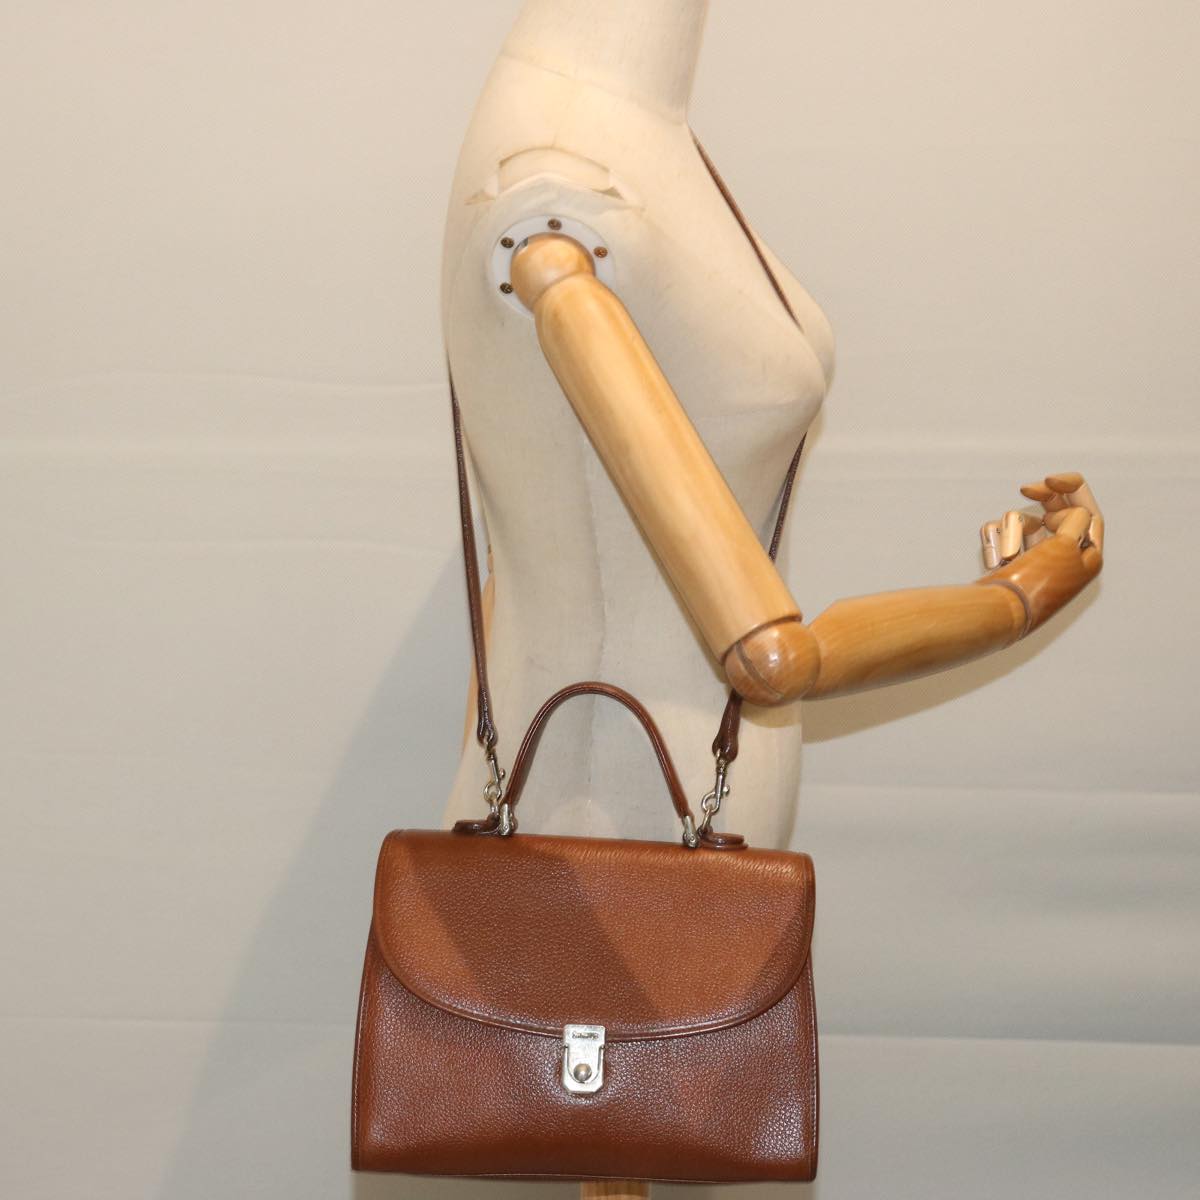 Burberrys Hand Bag Leather 2way Brown Auth ep3800